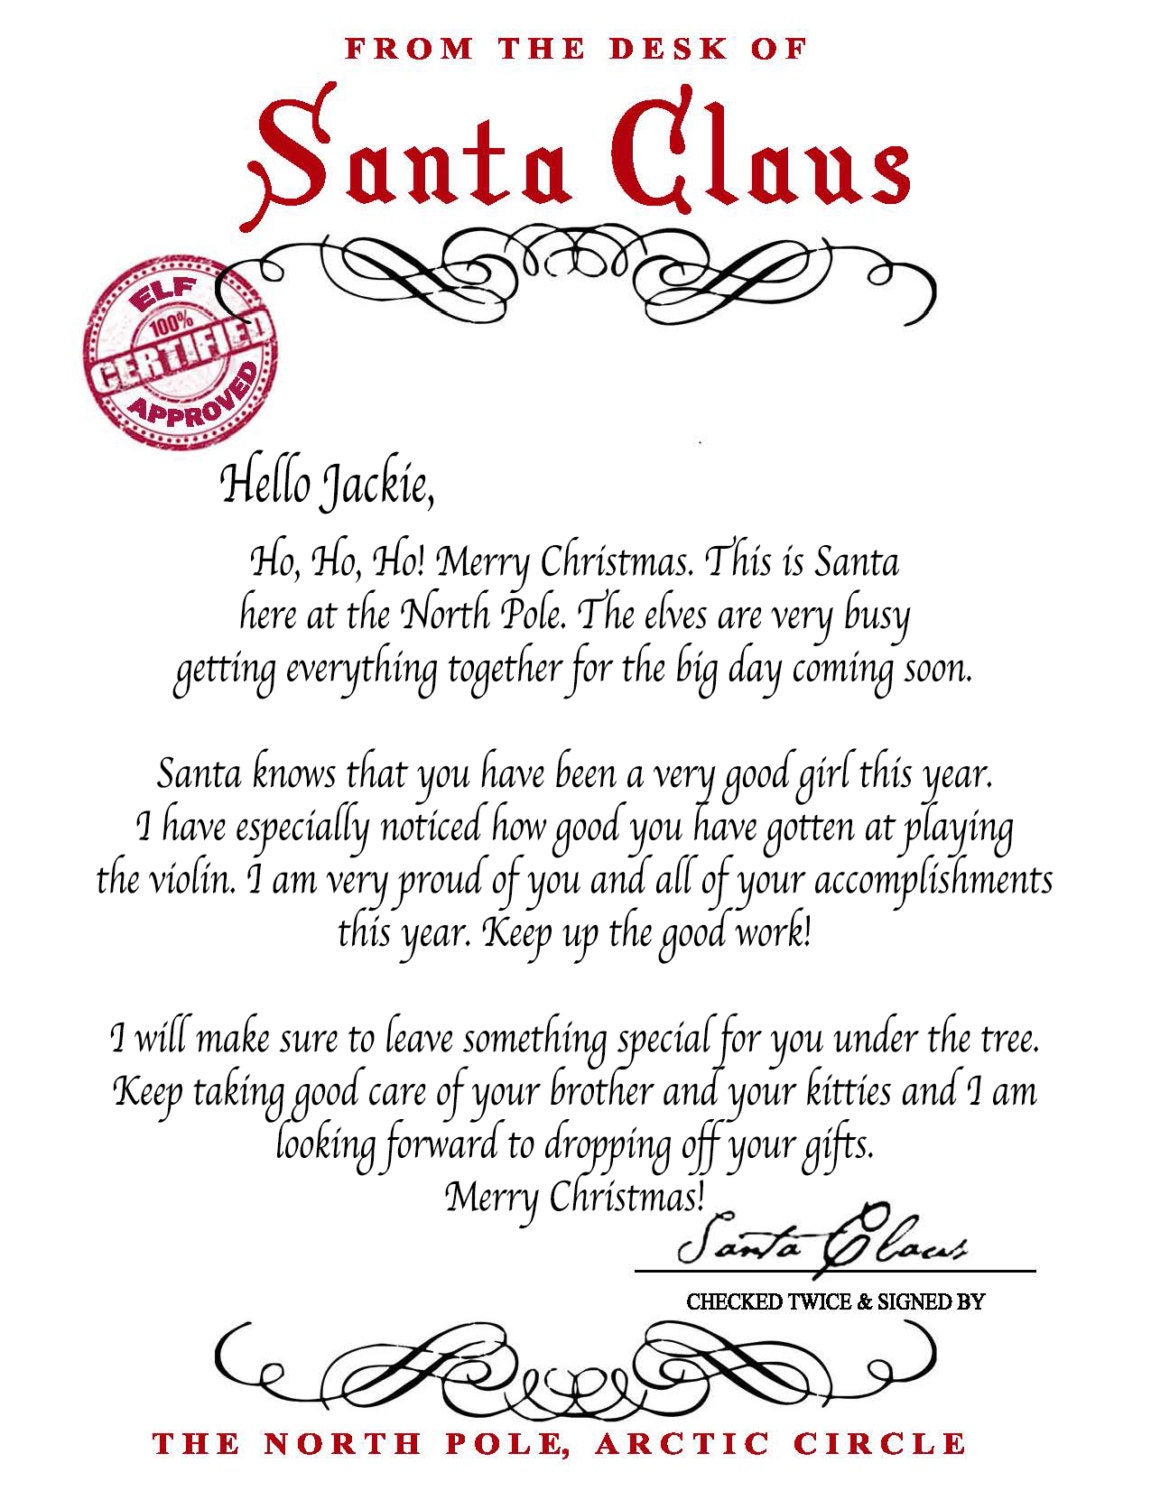 download-letter-from-santa-claus-editable-etsy